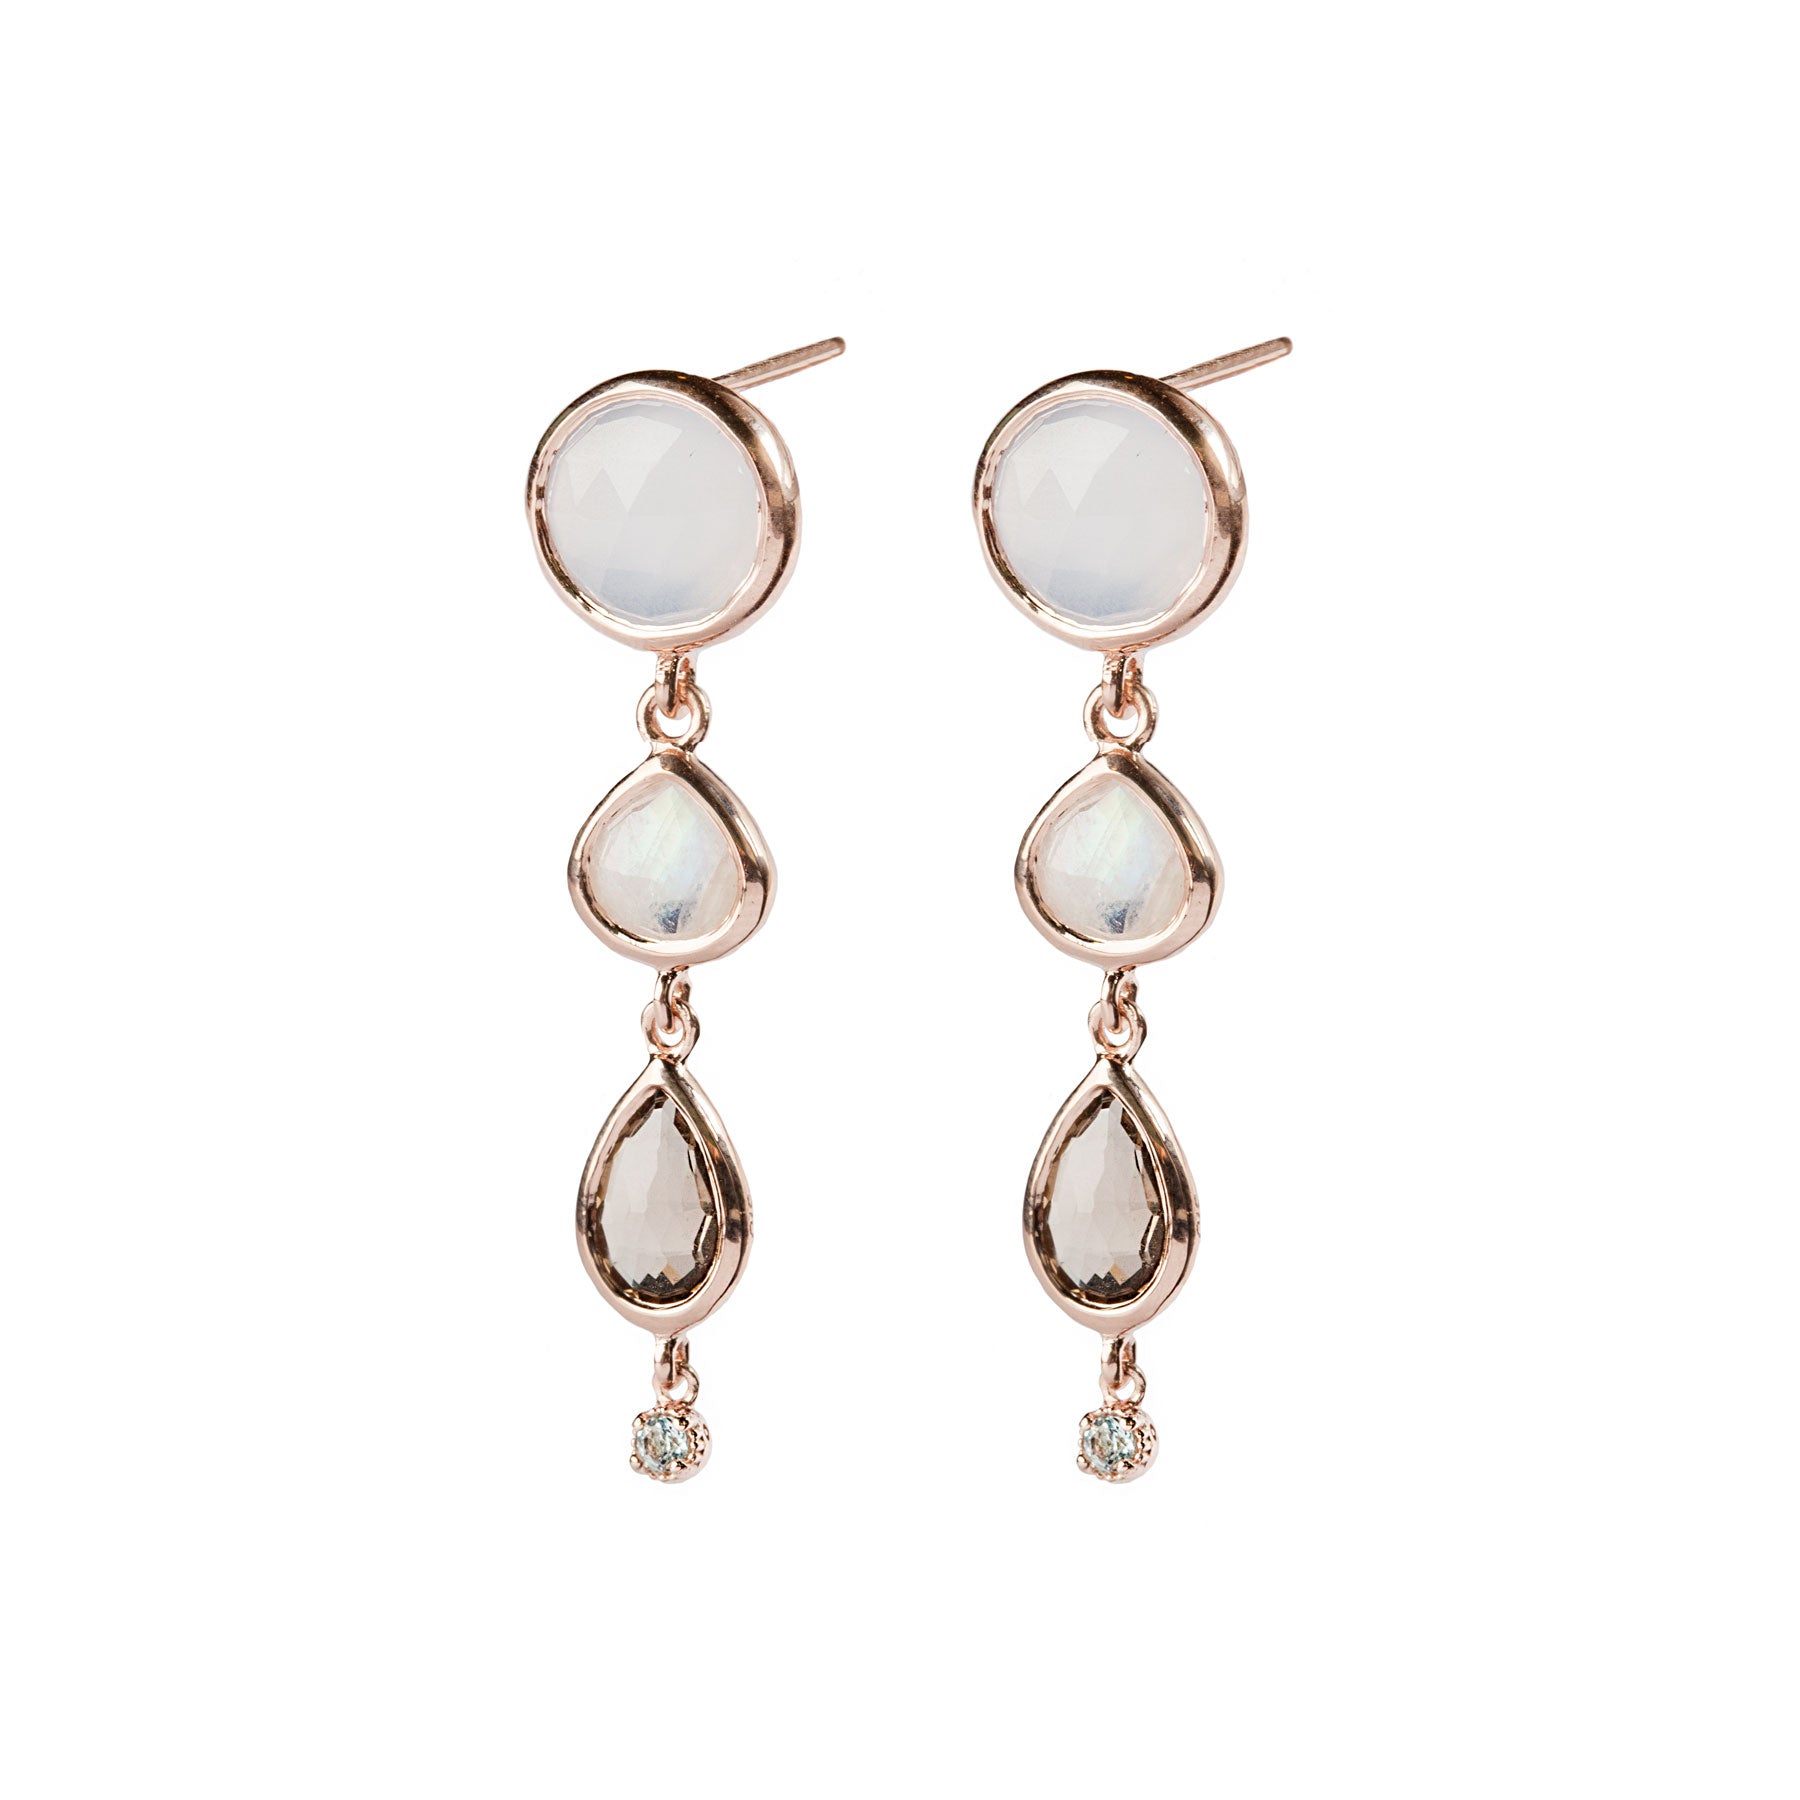 BLUE CHALCEDONY, MOONSTONE AND SMOKEY QUARTZ EARRINGS SET IN ROSE GOLD PLATED